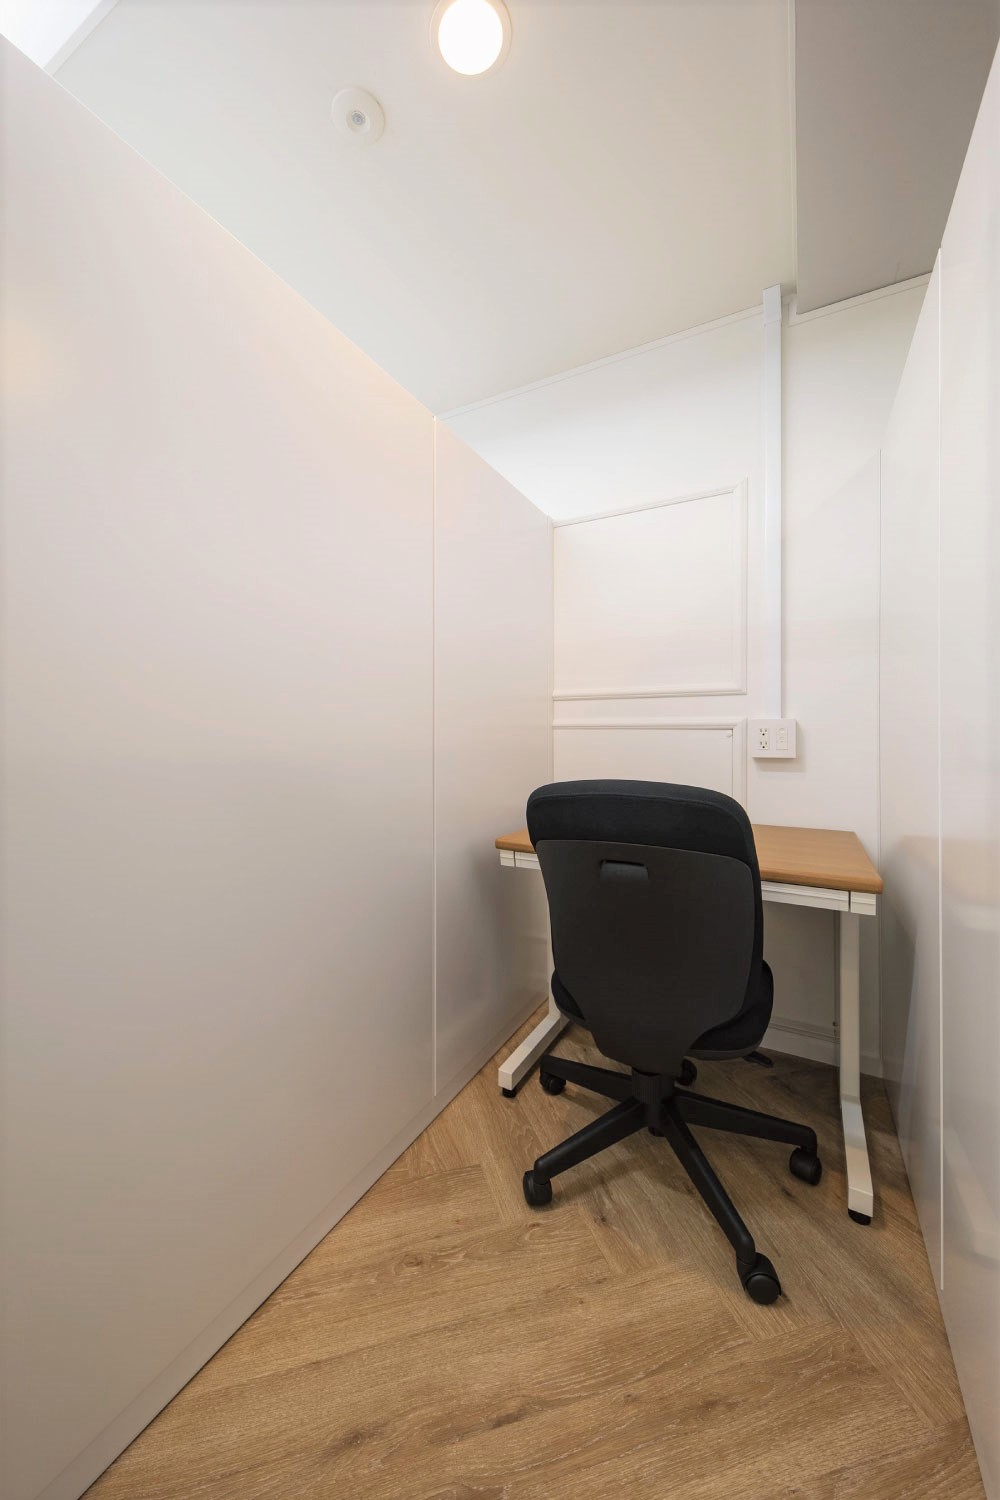 Booth type office space - TENSHO OFFICE Minami-aoyama ANNEX